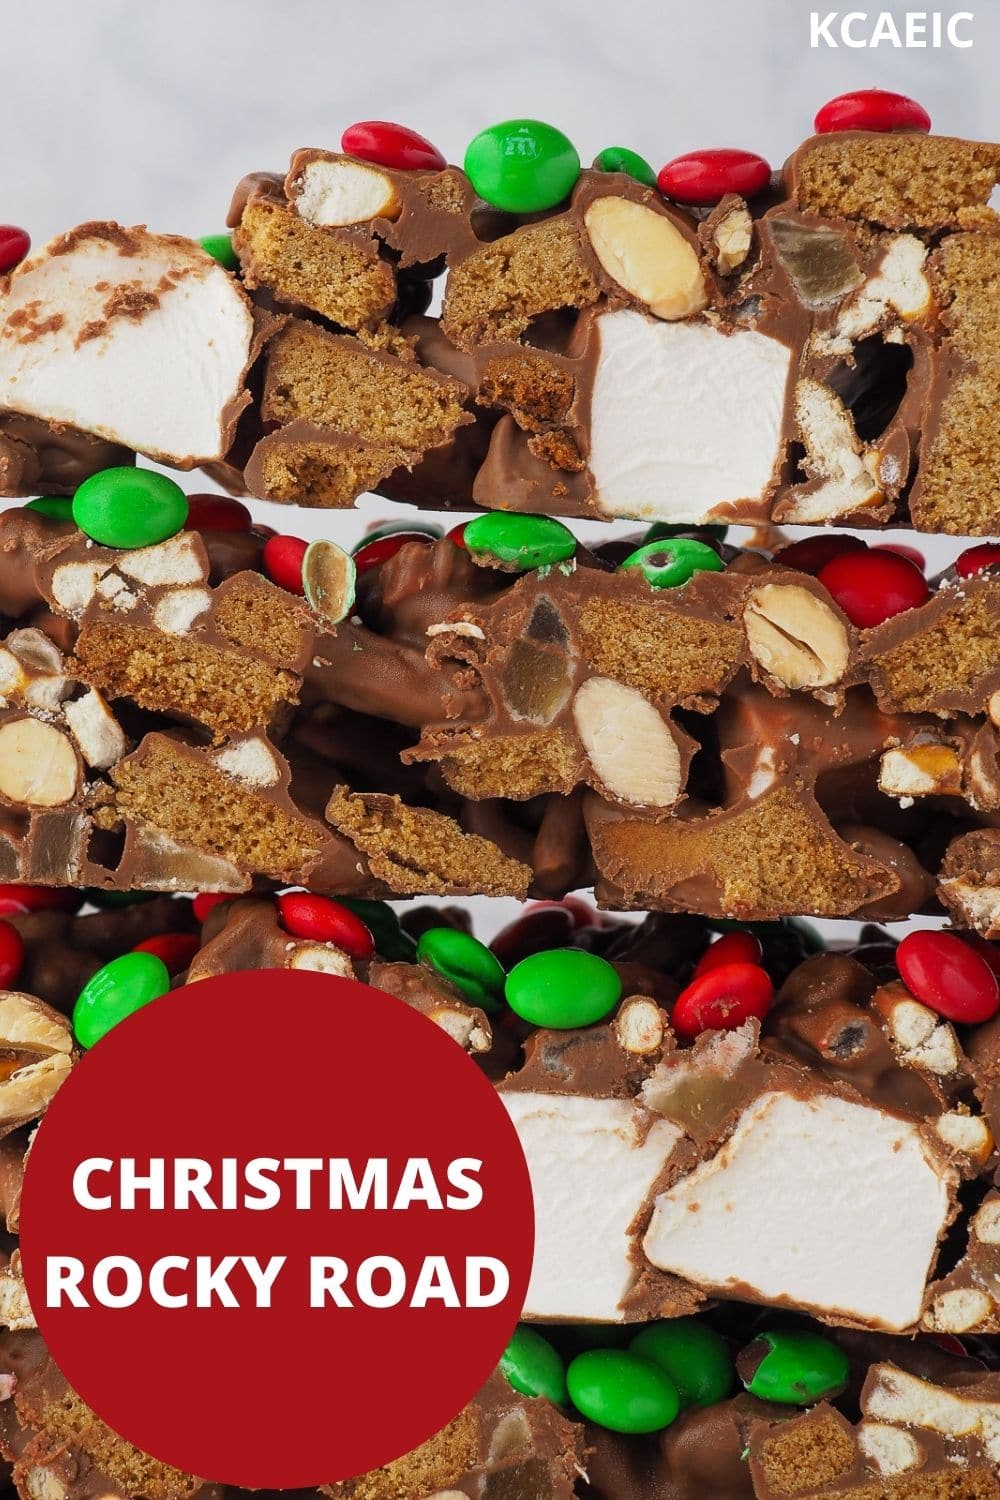 Close up of a large stack of rocky road, with text overlay, Christmas Rocky Road and KCAEIC.